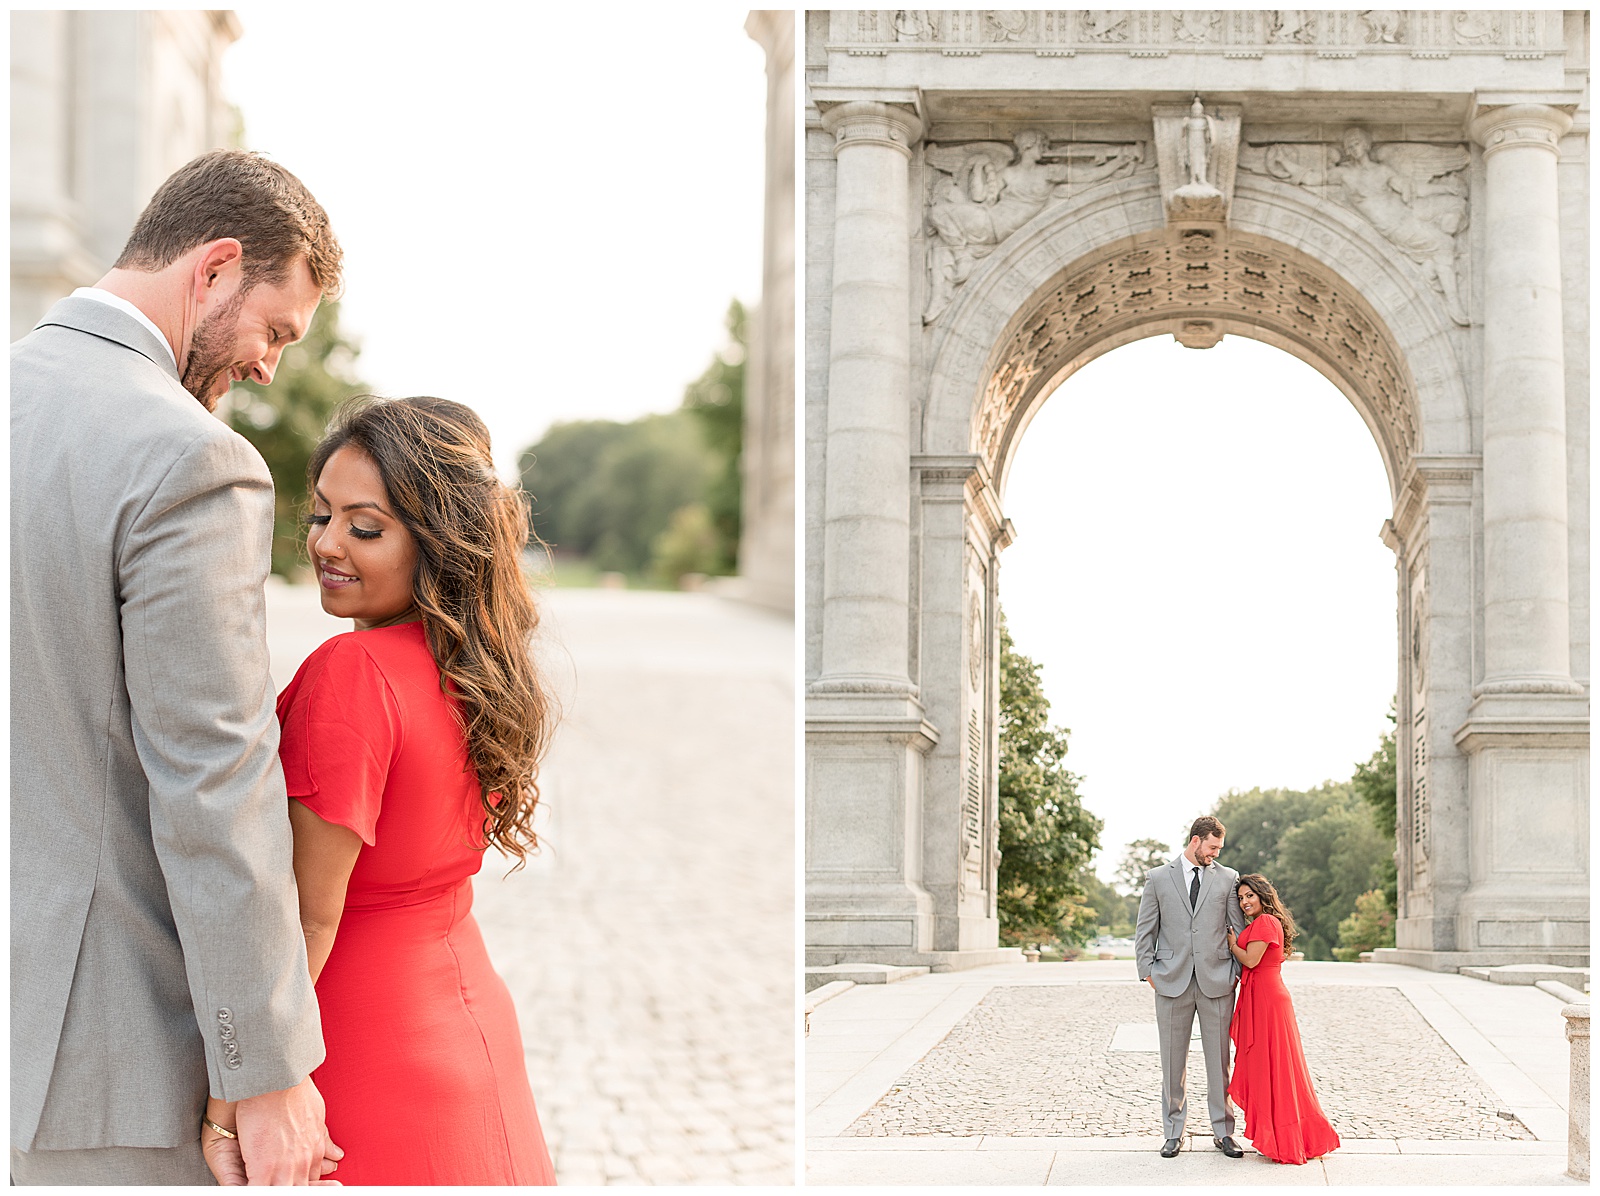 close up of couple with their backs angled towards the camera and the guy is on the left looking towards his right shoulder and towards the girl and the girl is on the right and looking towards her left shoulder and his smiling and their hands are joined together with the archway and trees behind them at the National Memorial Arch in Valley Forge, PA, couple is standing in center of walkway under large archway with the guy on the left and the girl on the right and his right hand is in his pocket and the girl is turned slightly toward the guys with her left arm resting on his chest and they are looking at the camera at the National Memorial Arch in Valley Forge, PA